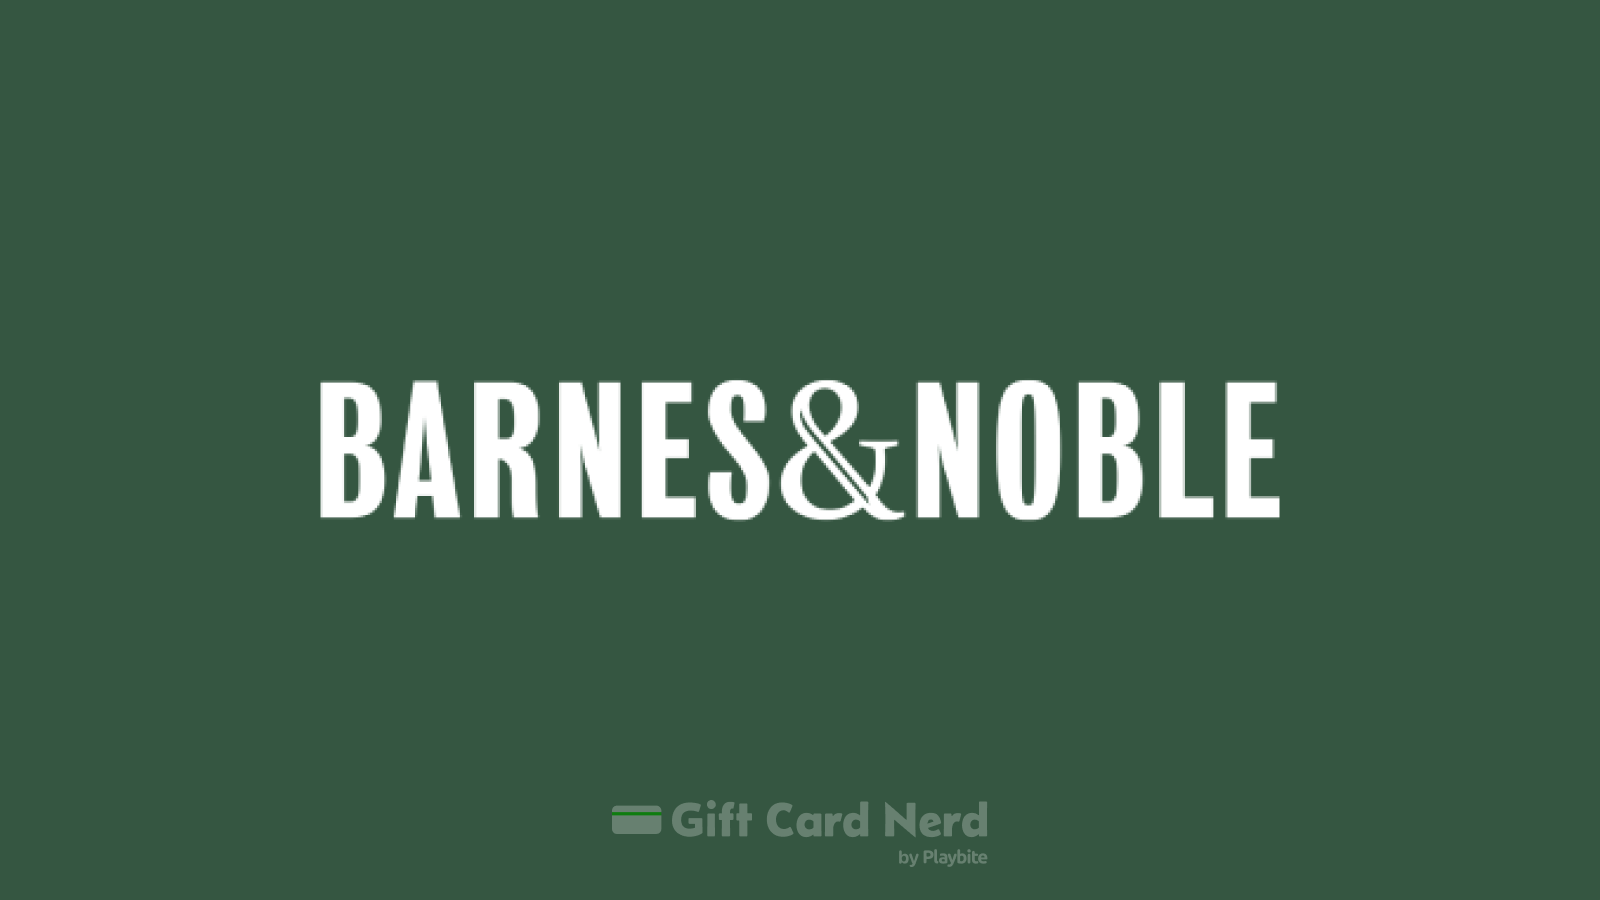 Can I Use a Barnes and Noble Gift Card on Venmo?